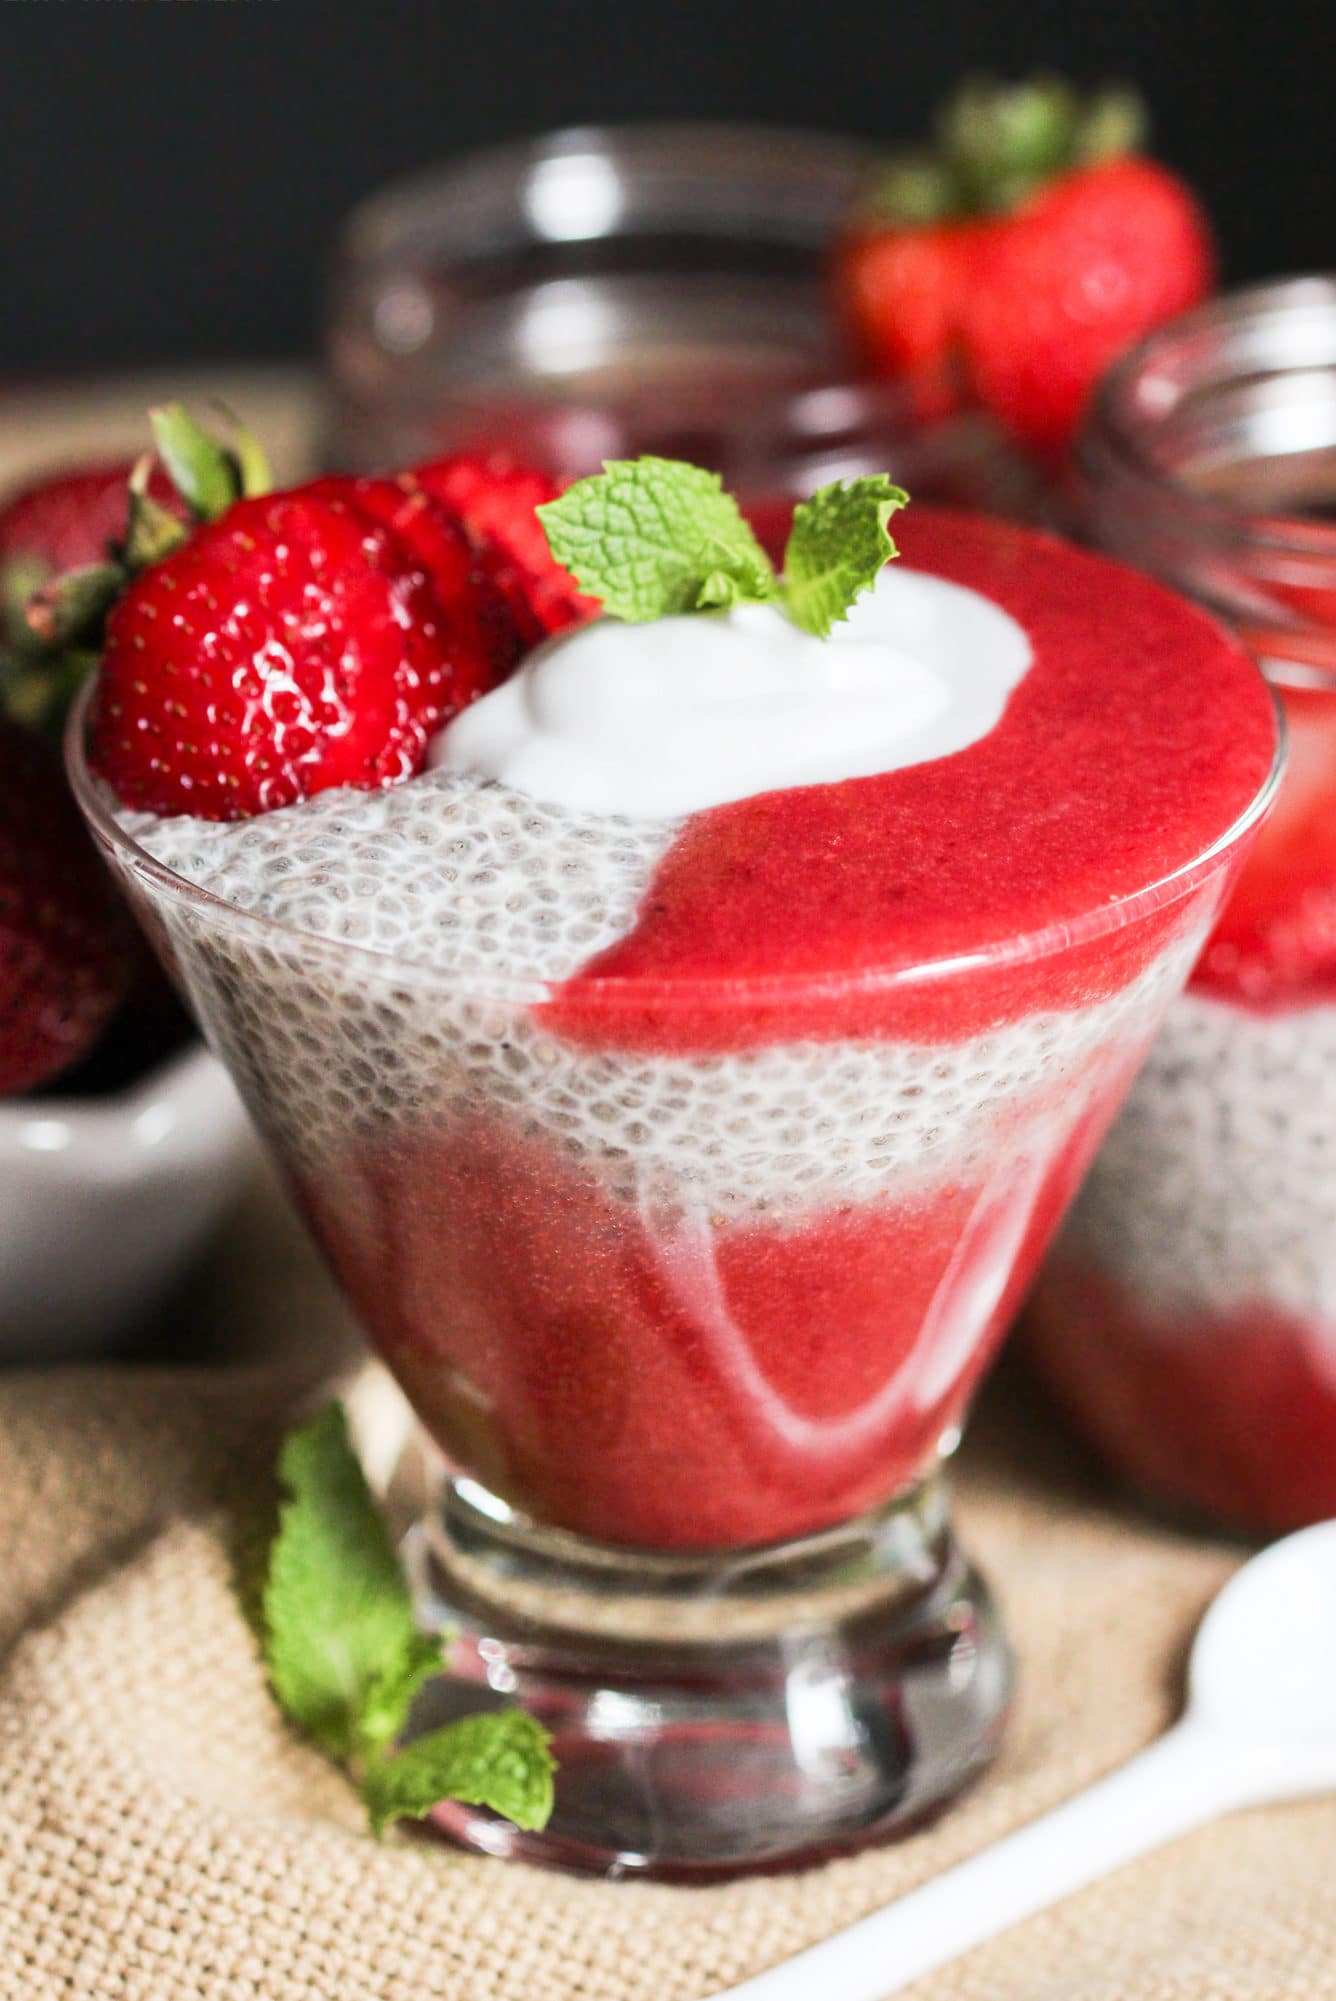 Healthy Strawberry Vanilla Chia Seed Pudding (refined sugar free, low fat, low calorie, high fiber, gluten free, dairy free, vegan) - Healthy Dessert Recipes at Desserts with Benefits